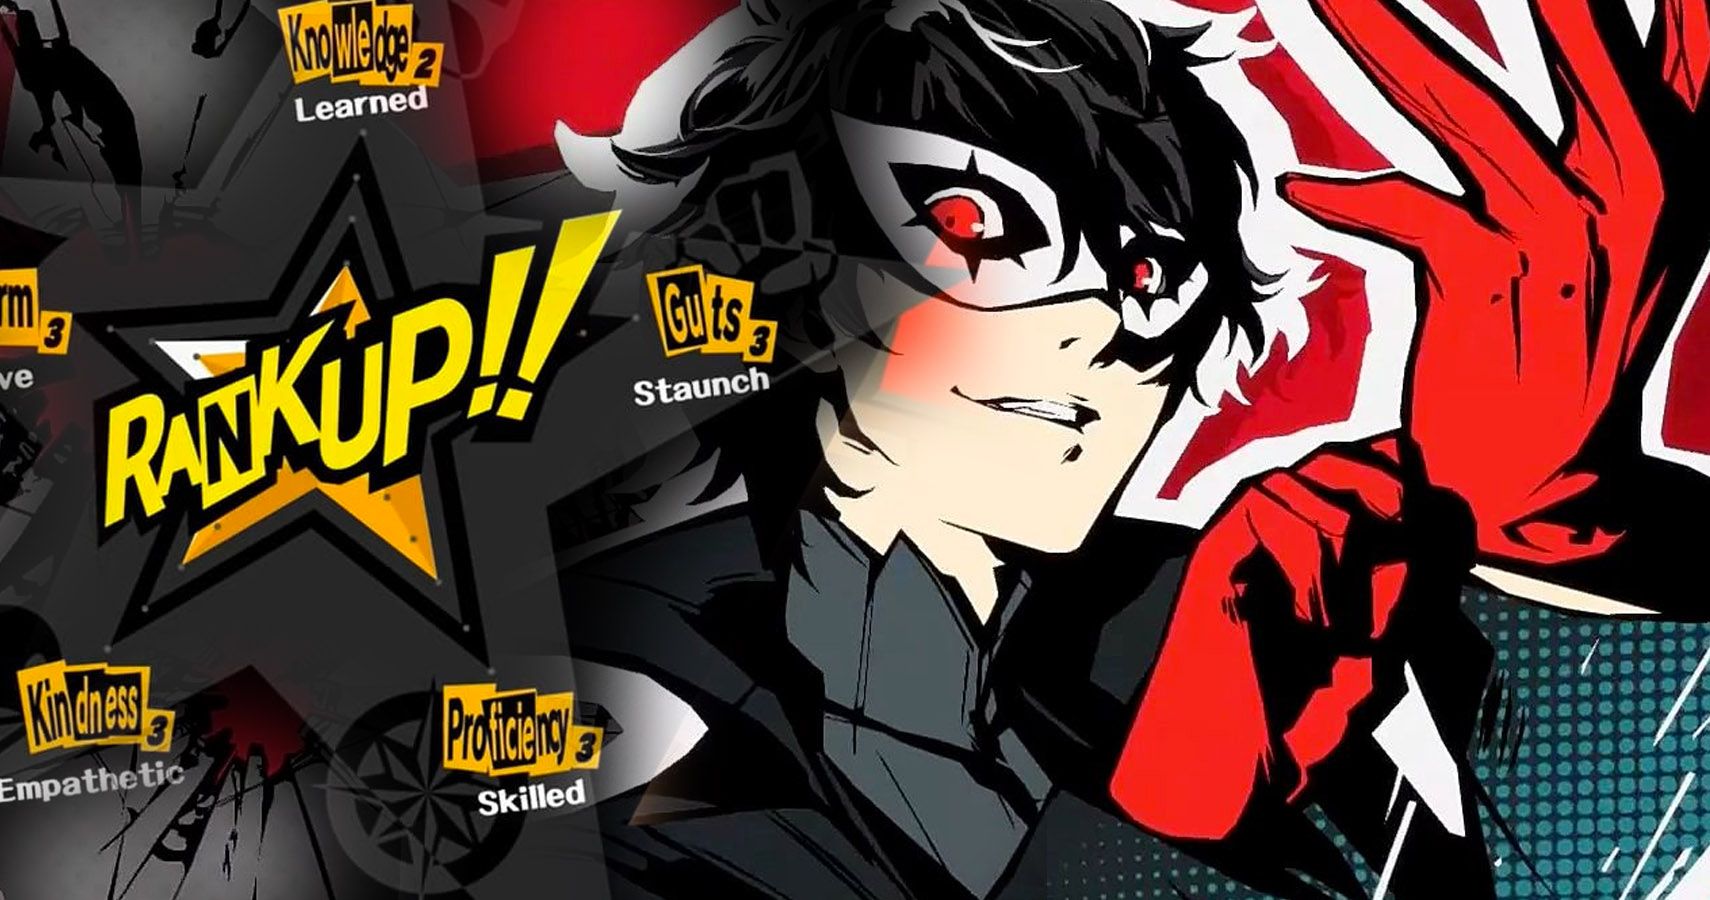 Persona 5 10 Ways To Level Up Your Social Stats Players Often Miss